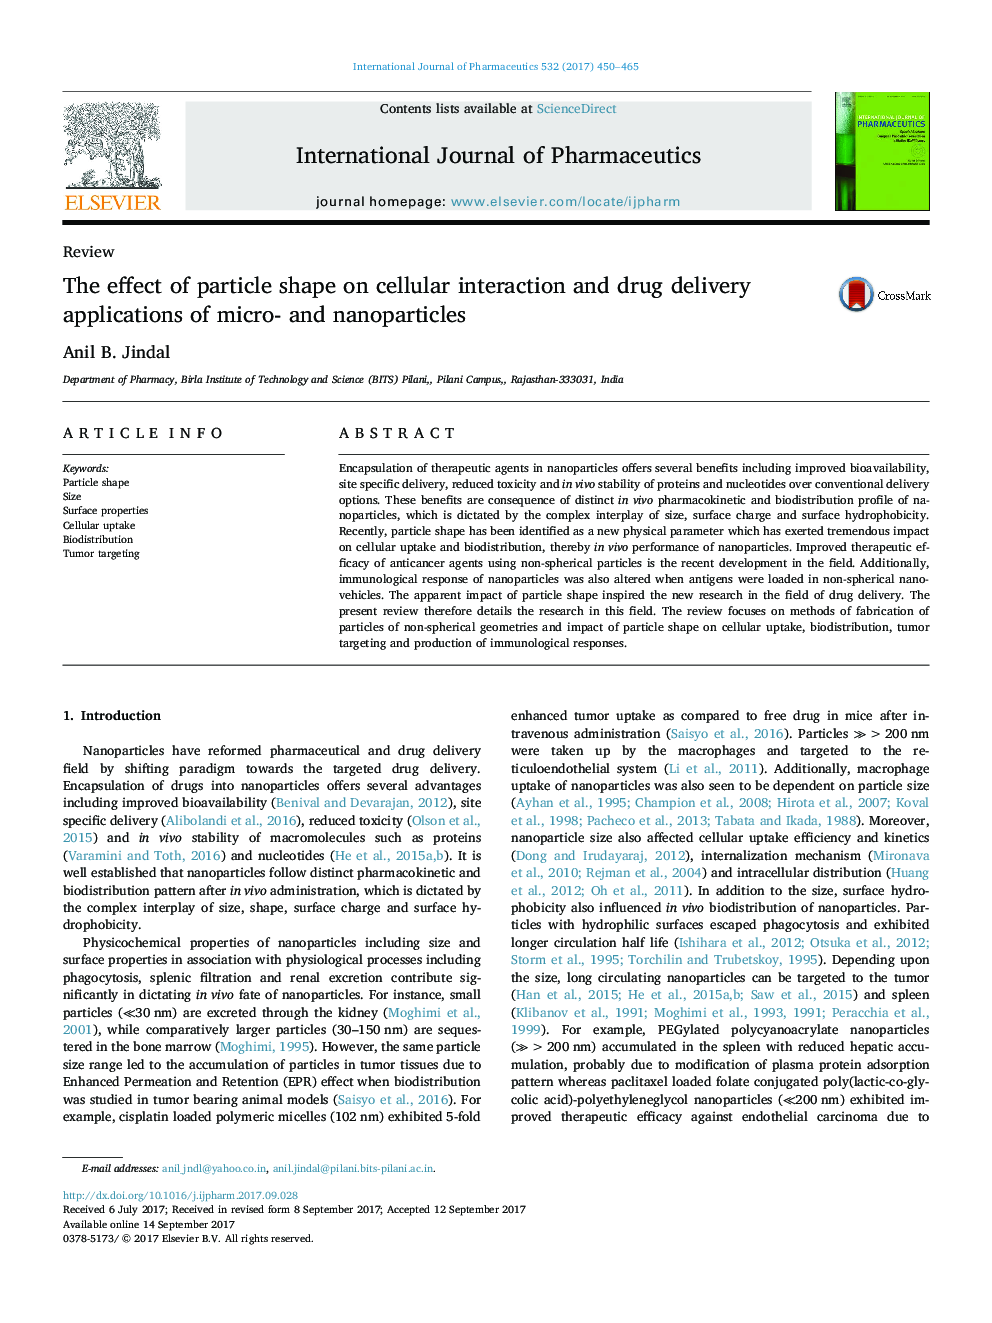 The effect of particle shape on cellular interaction and drug delivery applications of micro- and nanoparticles